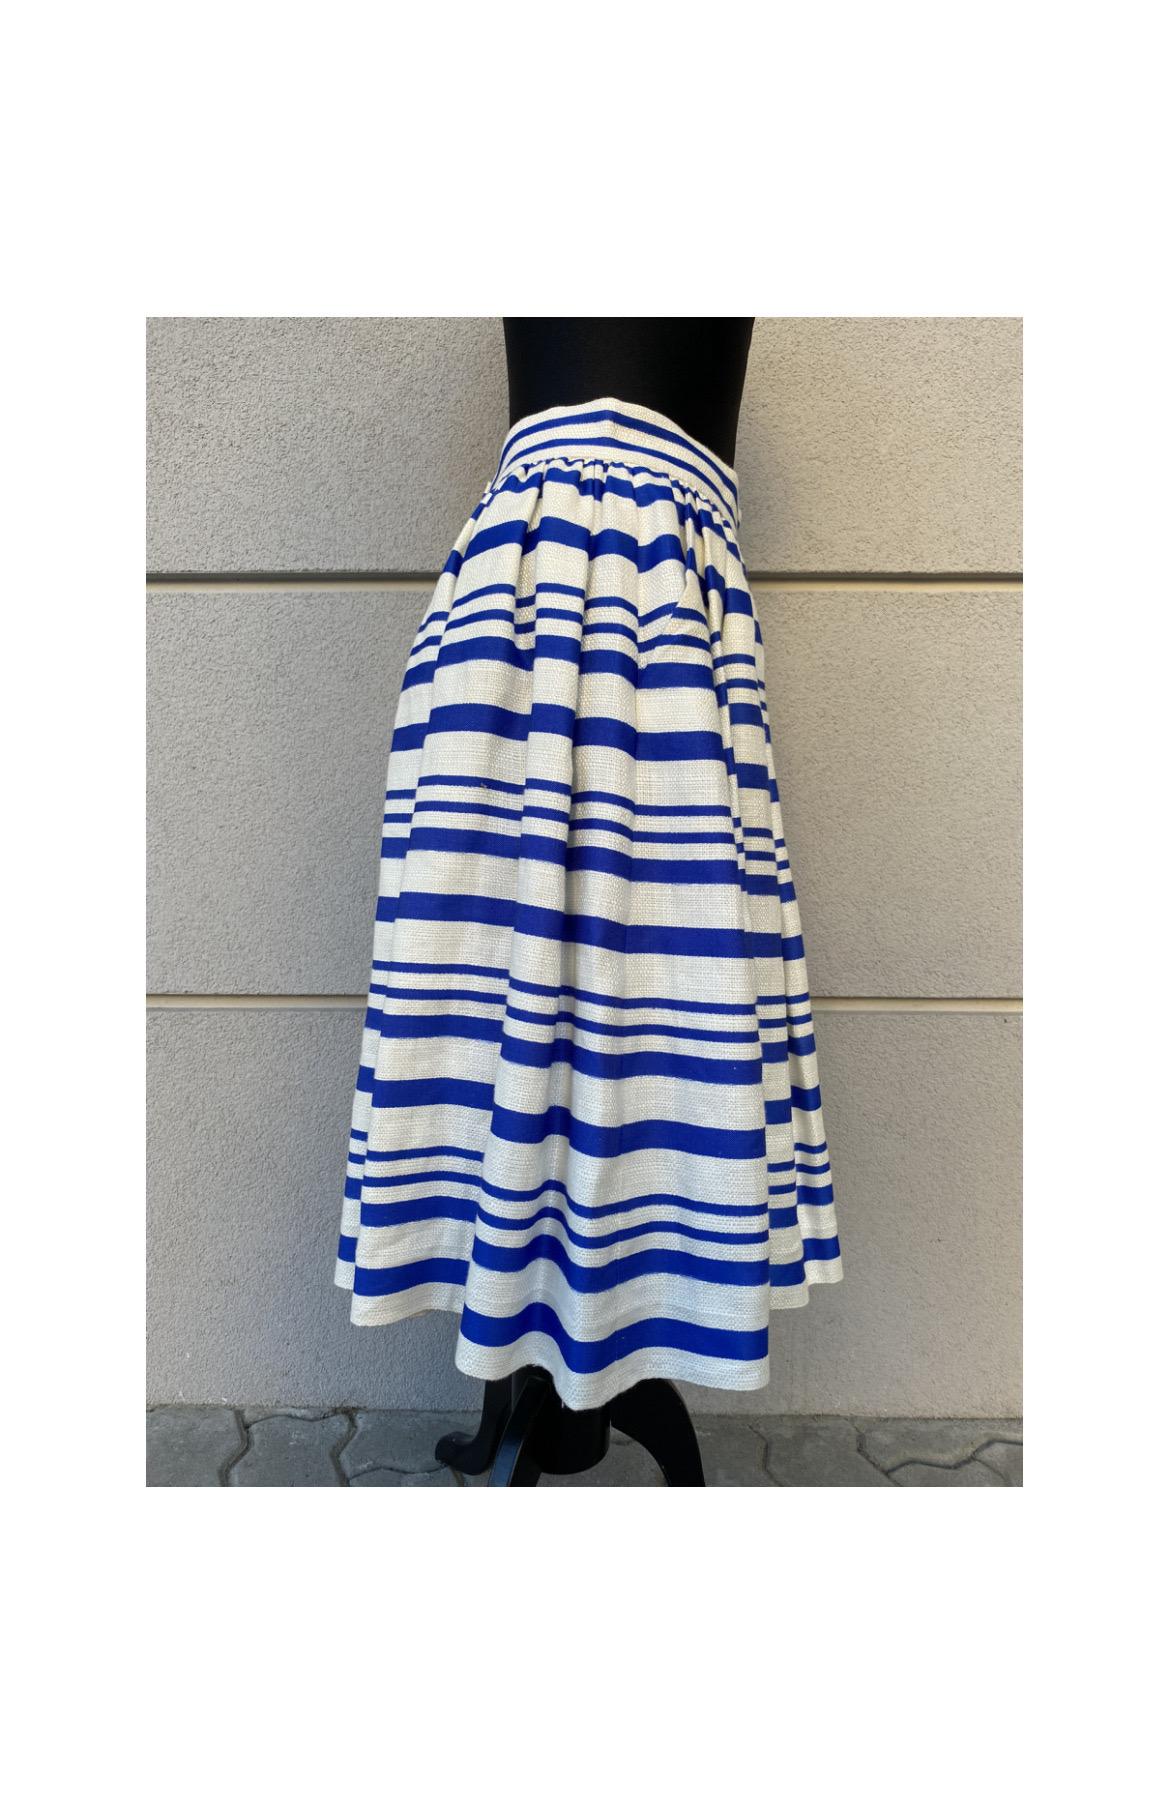 Dolce&Gabbanaa linen skirt, size 42, white with light blue stripes, measurements: 
waist 32 cm, 
hips 60 cm, 
length 64 cm, 
in very good condition.